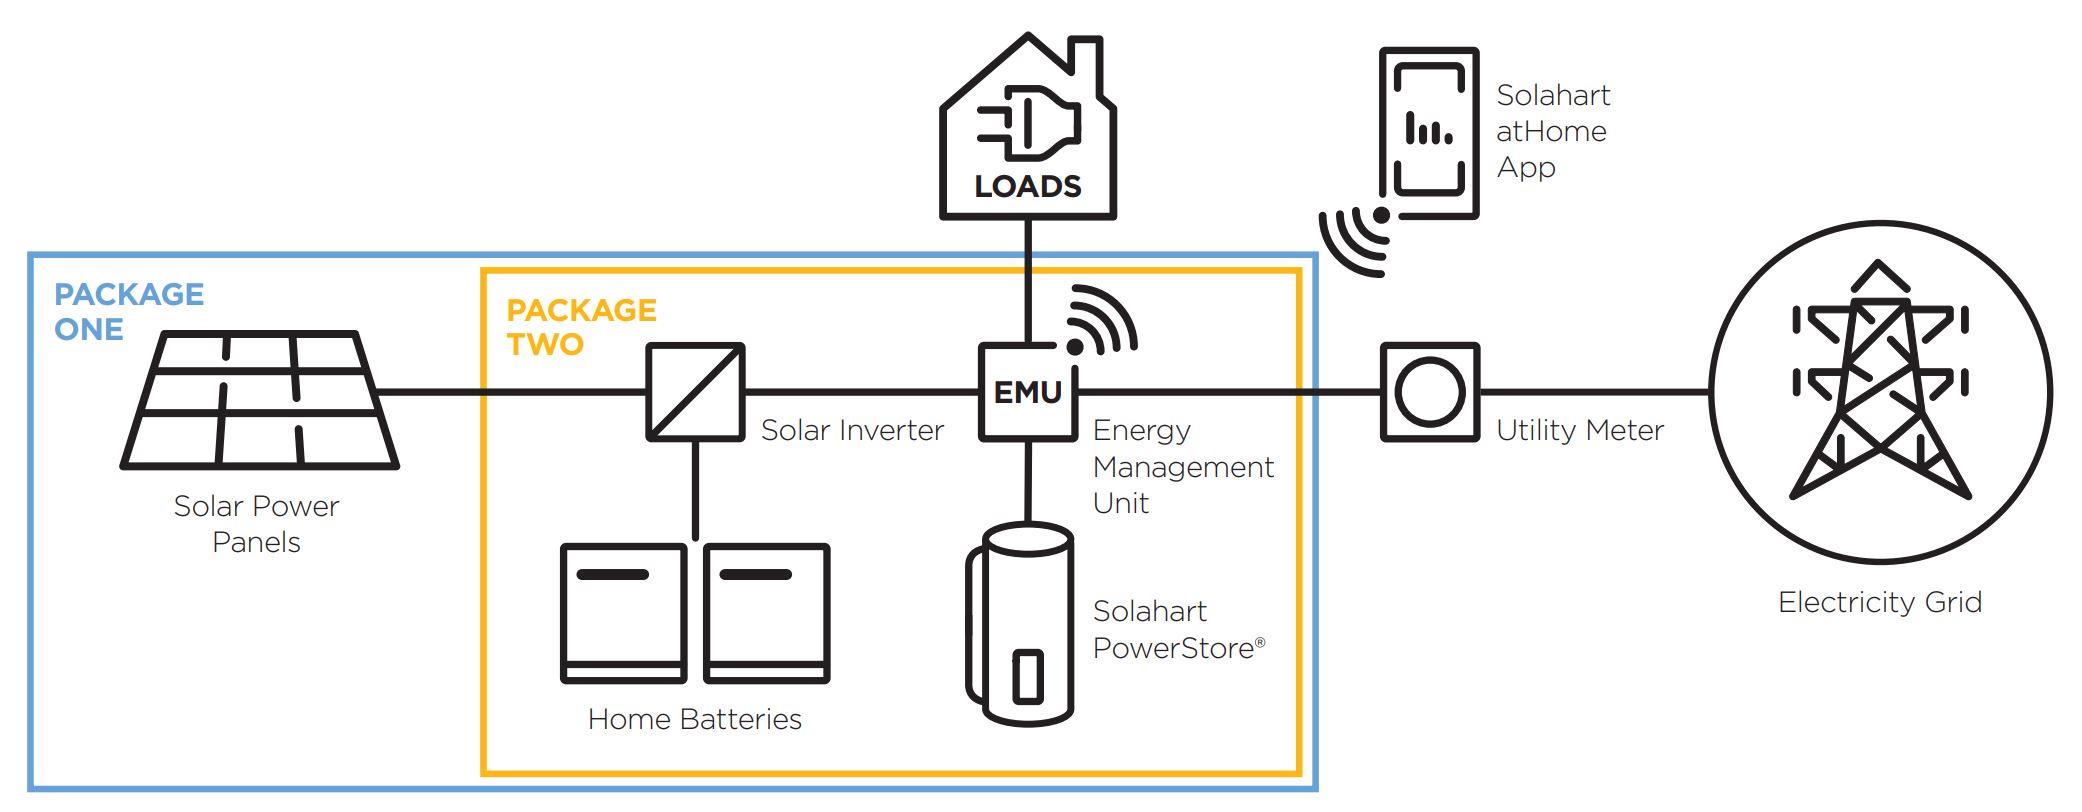 Infographic showing energy flow between solar power panels, home energy management unit, household appliances and the electricity grid